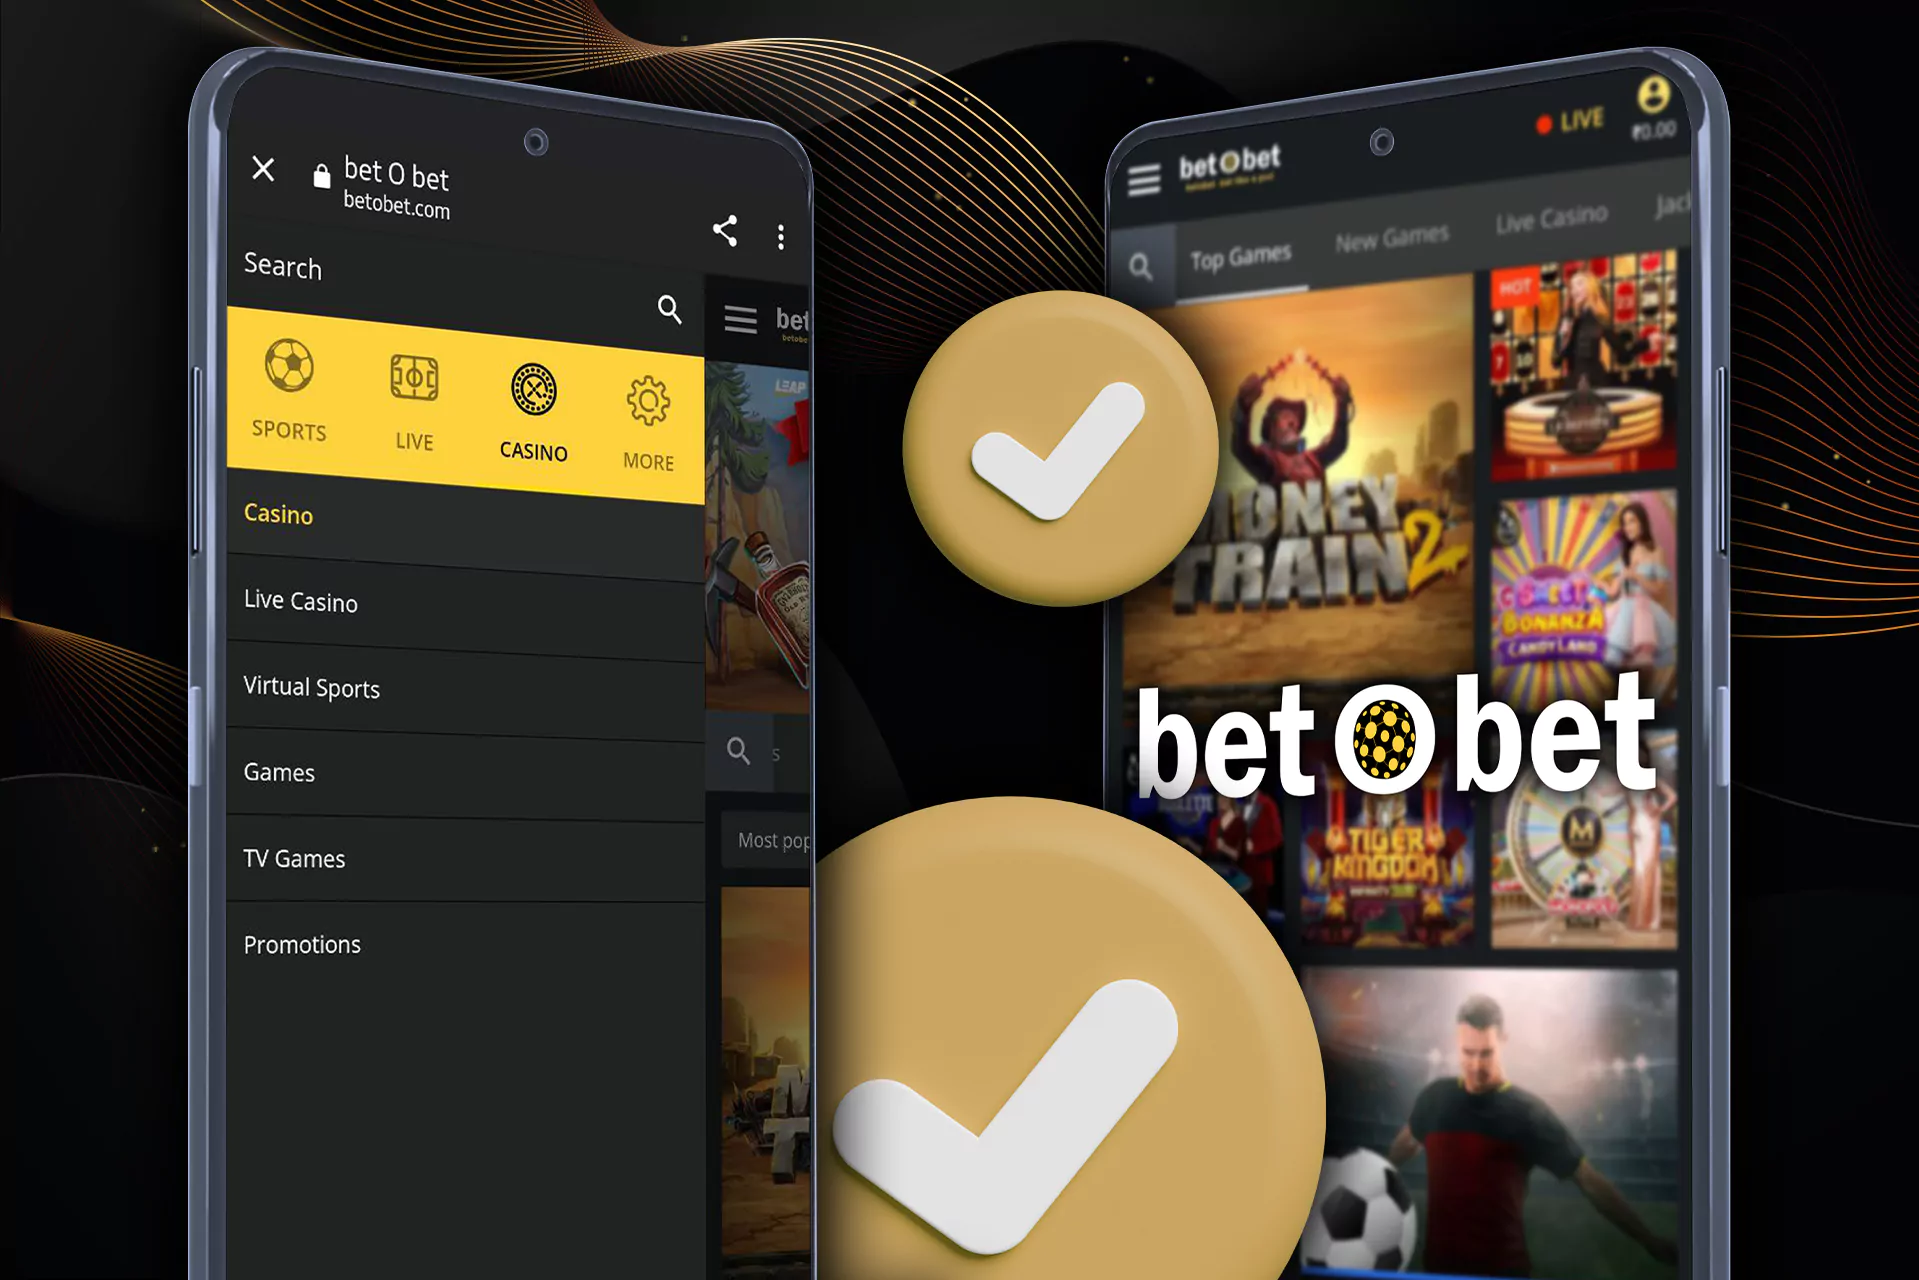 Bet O Bet has a lot of comfortable and handy features for bettors.